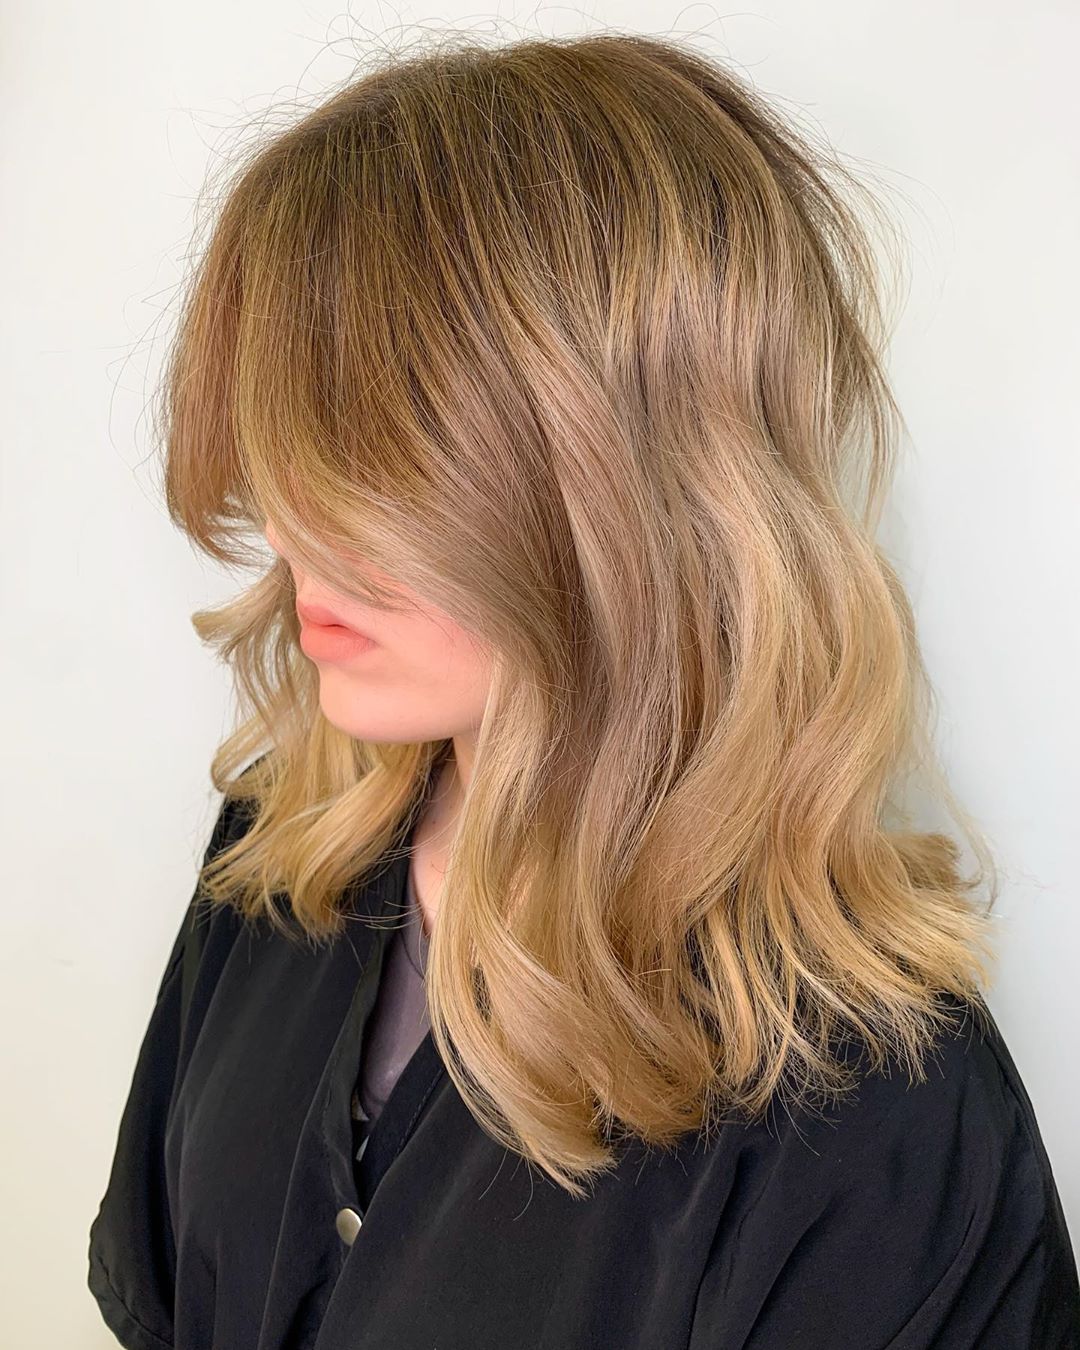 Medium to Long Rich Blonde with Curtain Bangs